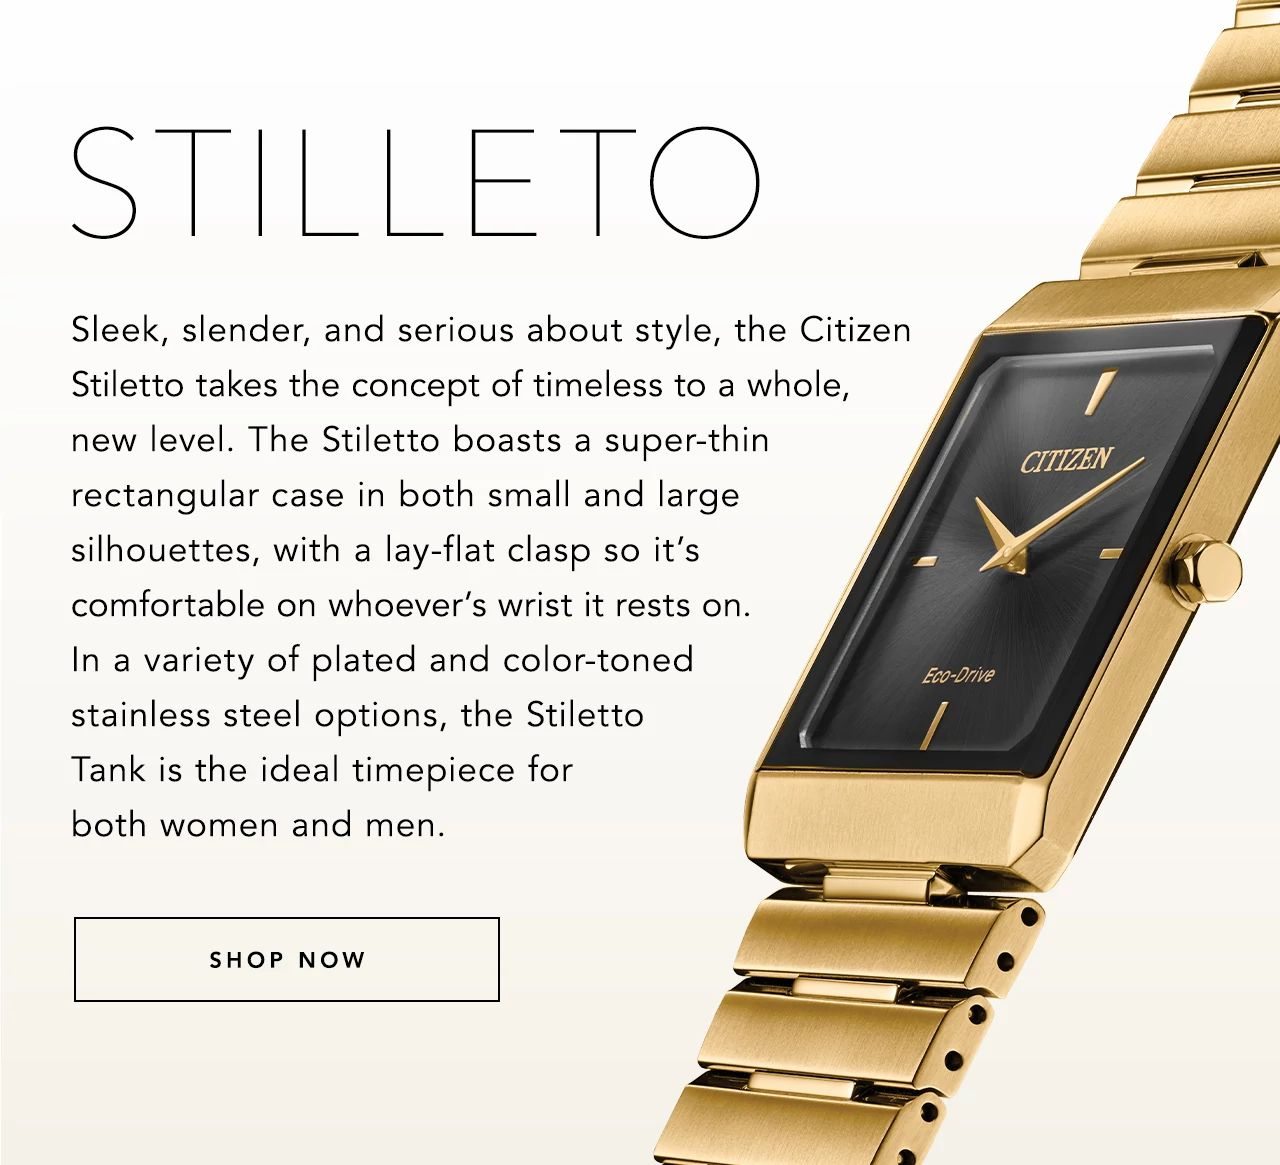 Sleek, slender, and serious about style, the Citizen Stiletto takes the concept of timeless to a whole, new level. The Stiletto boasts a super-thin rectangular case in both small and large silhouettes, with a lay-flat clasp so it’s comfortable on whoever’s wrist it rests on. In a variety of plated and color-toned stainless steel options, the Stiletto Tank is the ideal timepiece for both women and men.